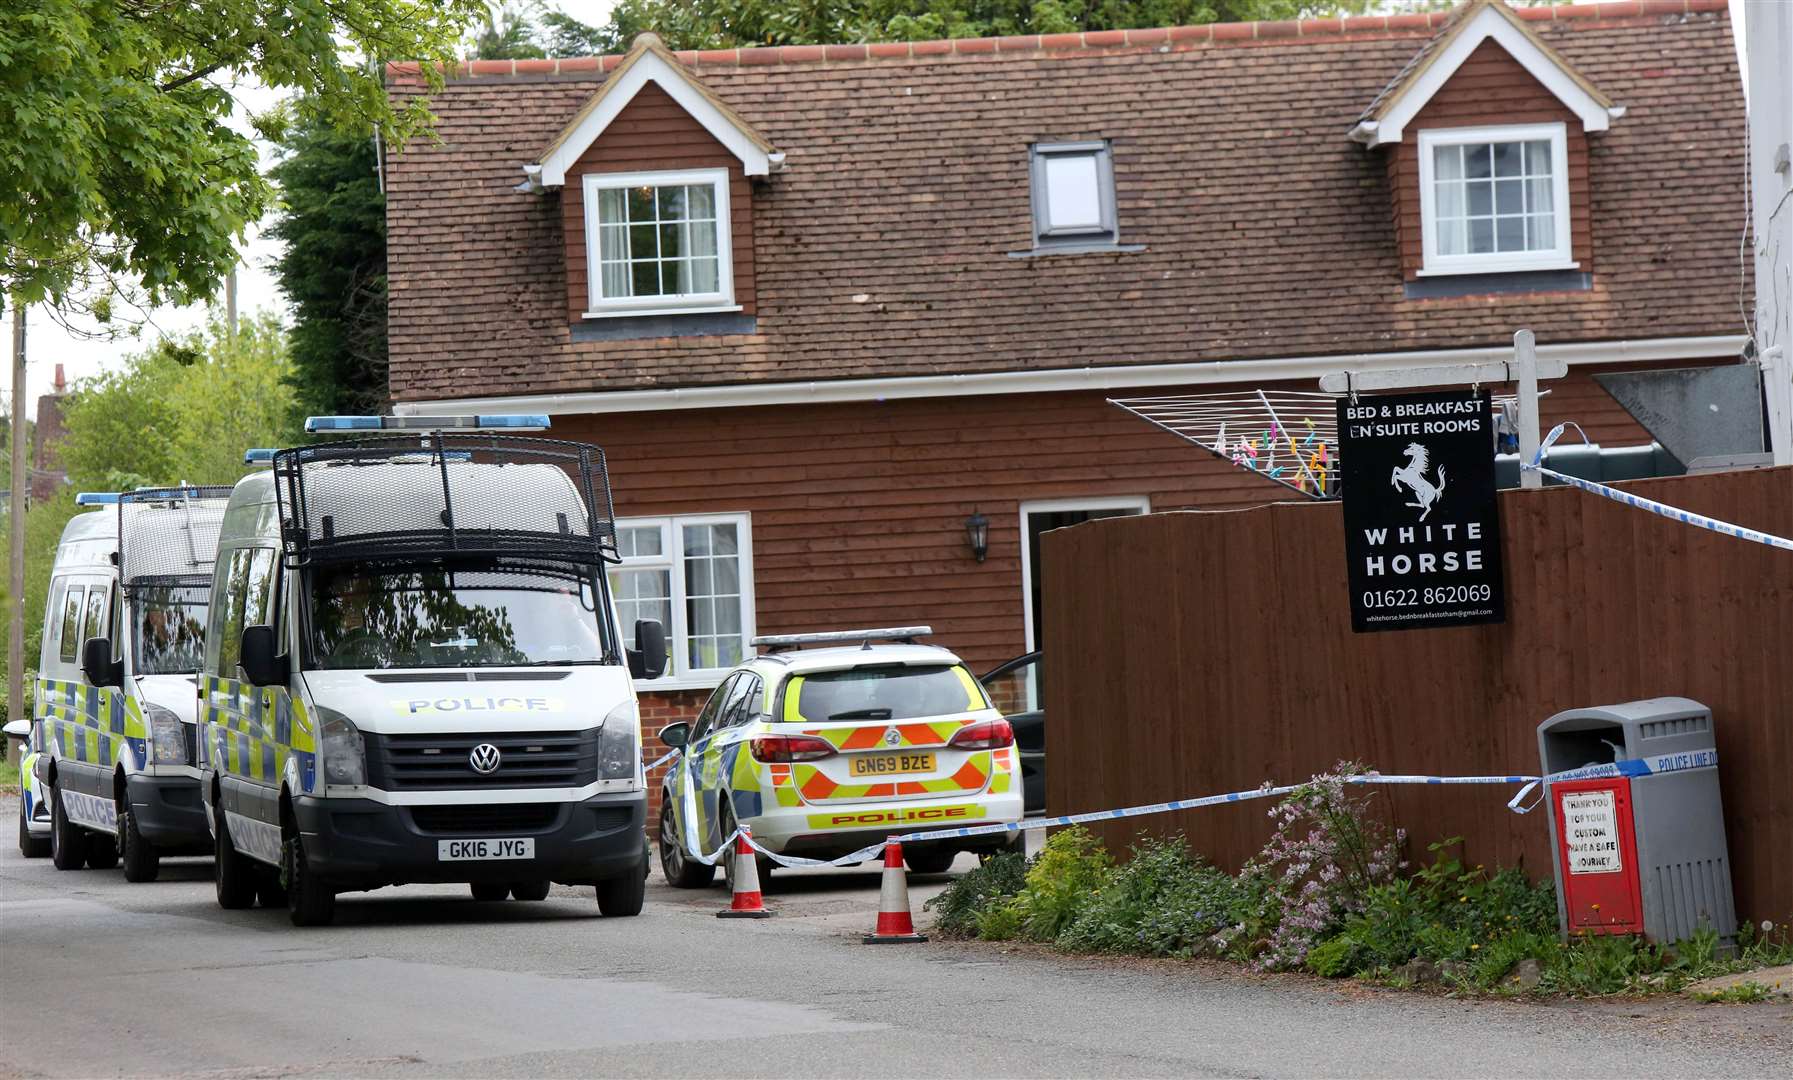 Police outside the White Horse in Otham after the brawl Picture: UKNIP